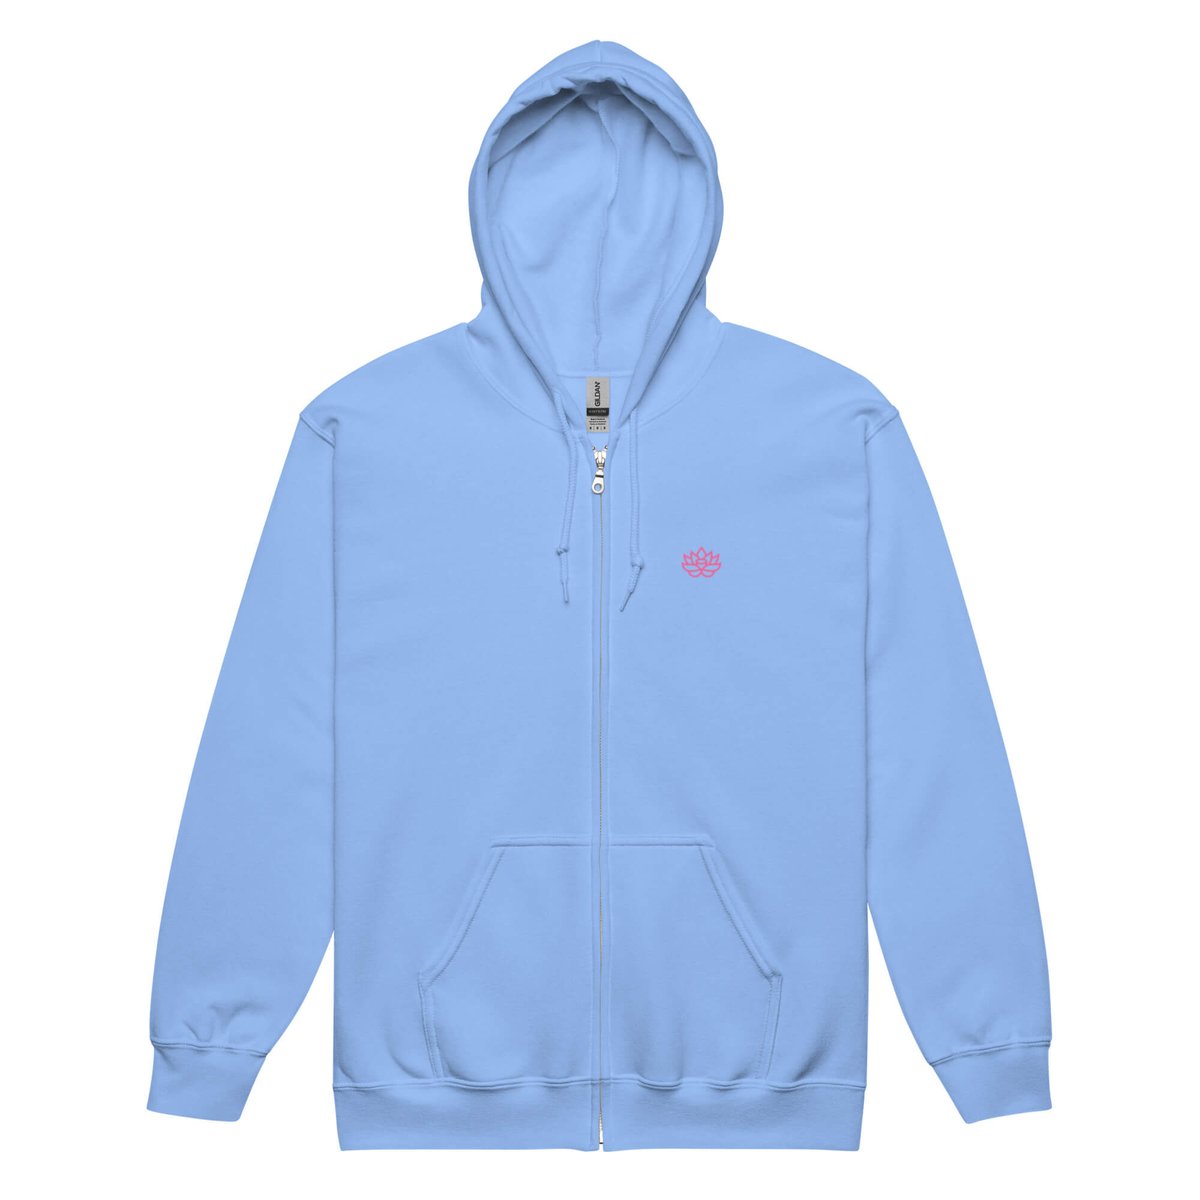 Fashion Maison i Will Wander presents the unisex Carolina Blue with Pink Lily zip hoodie we just dropped.
#fashiondesign #fashiondesigner #clothingdesign #clothingdesigner #hoodie #ziphoodie